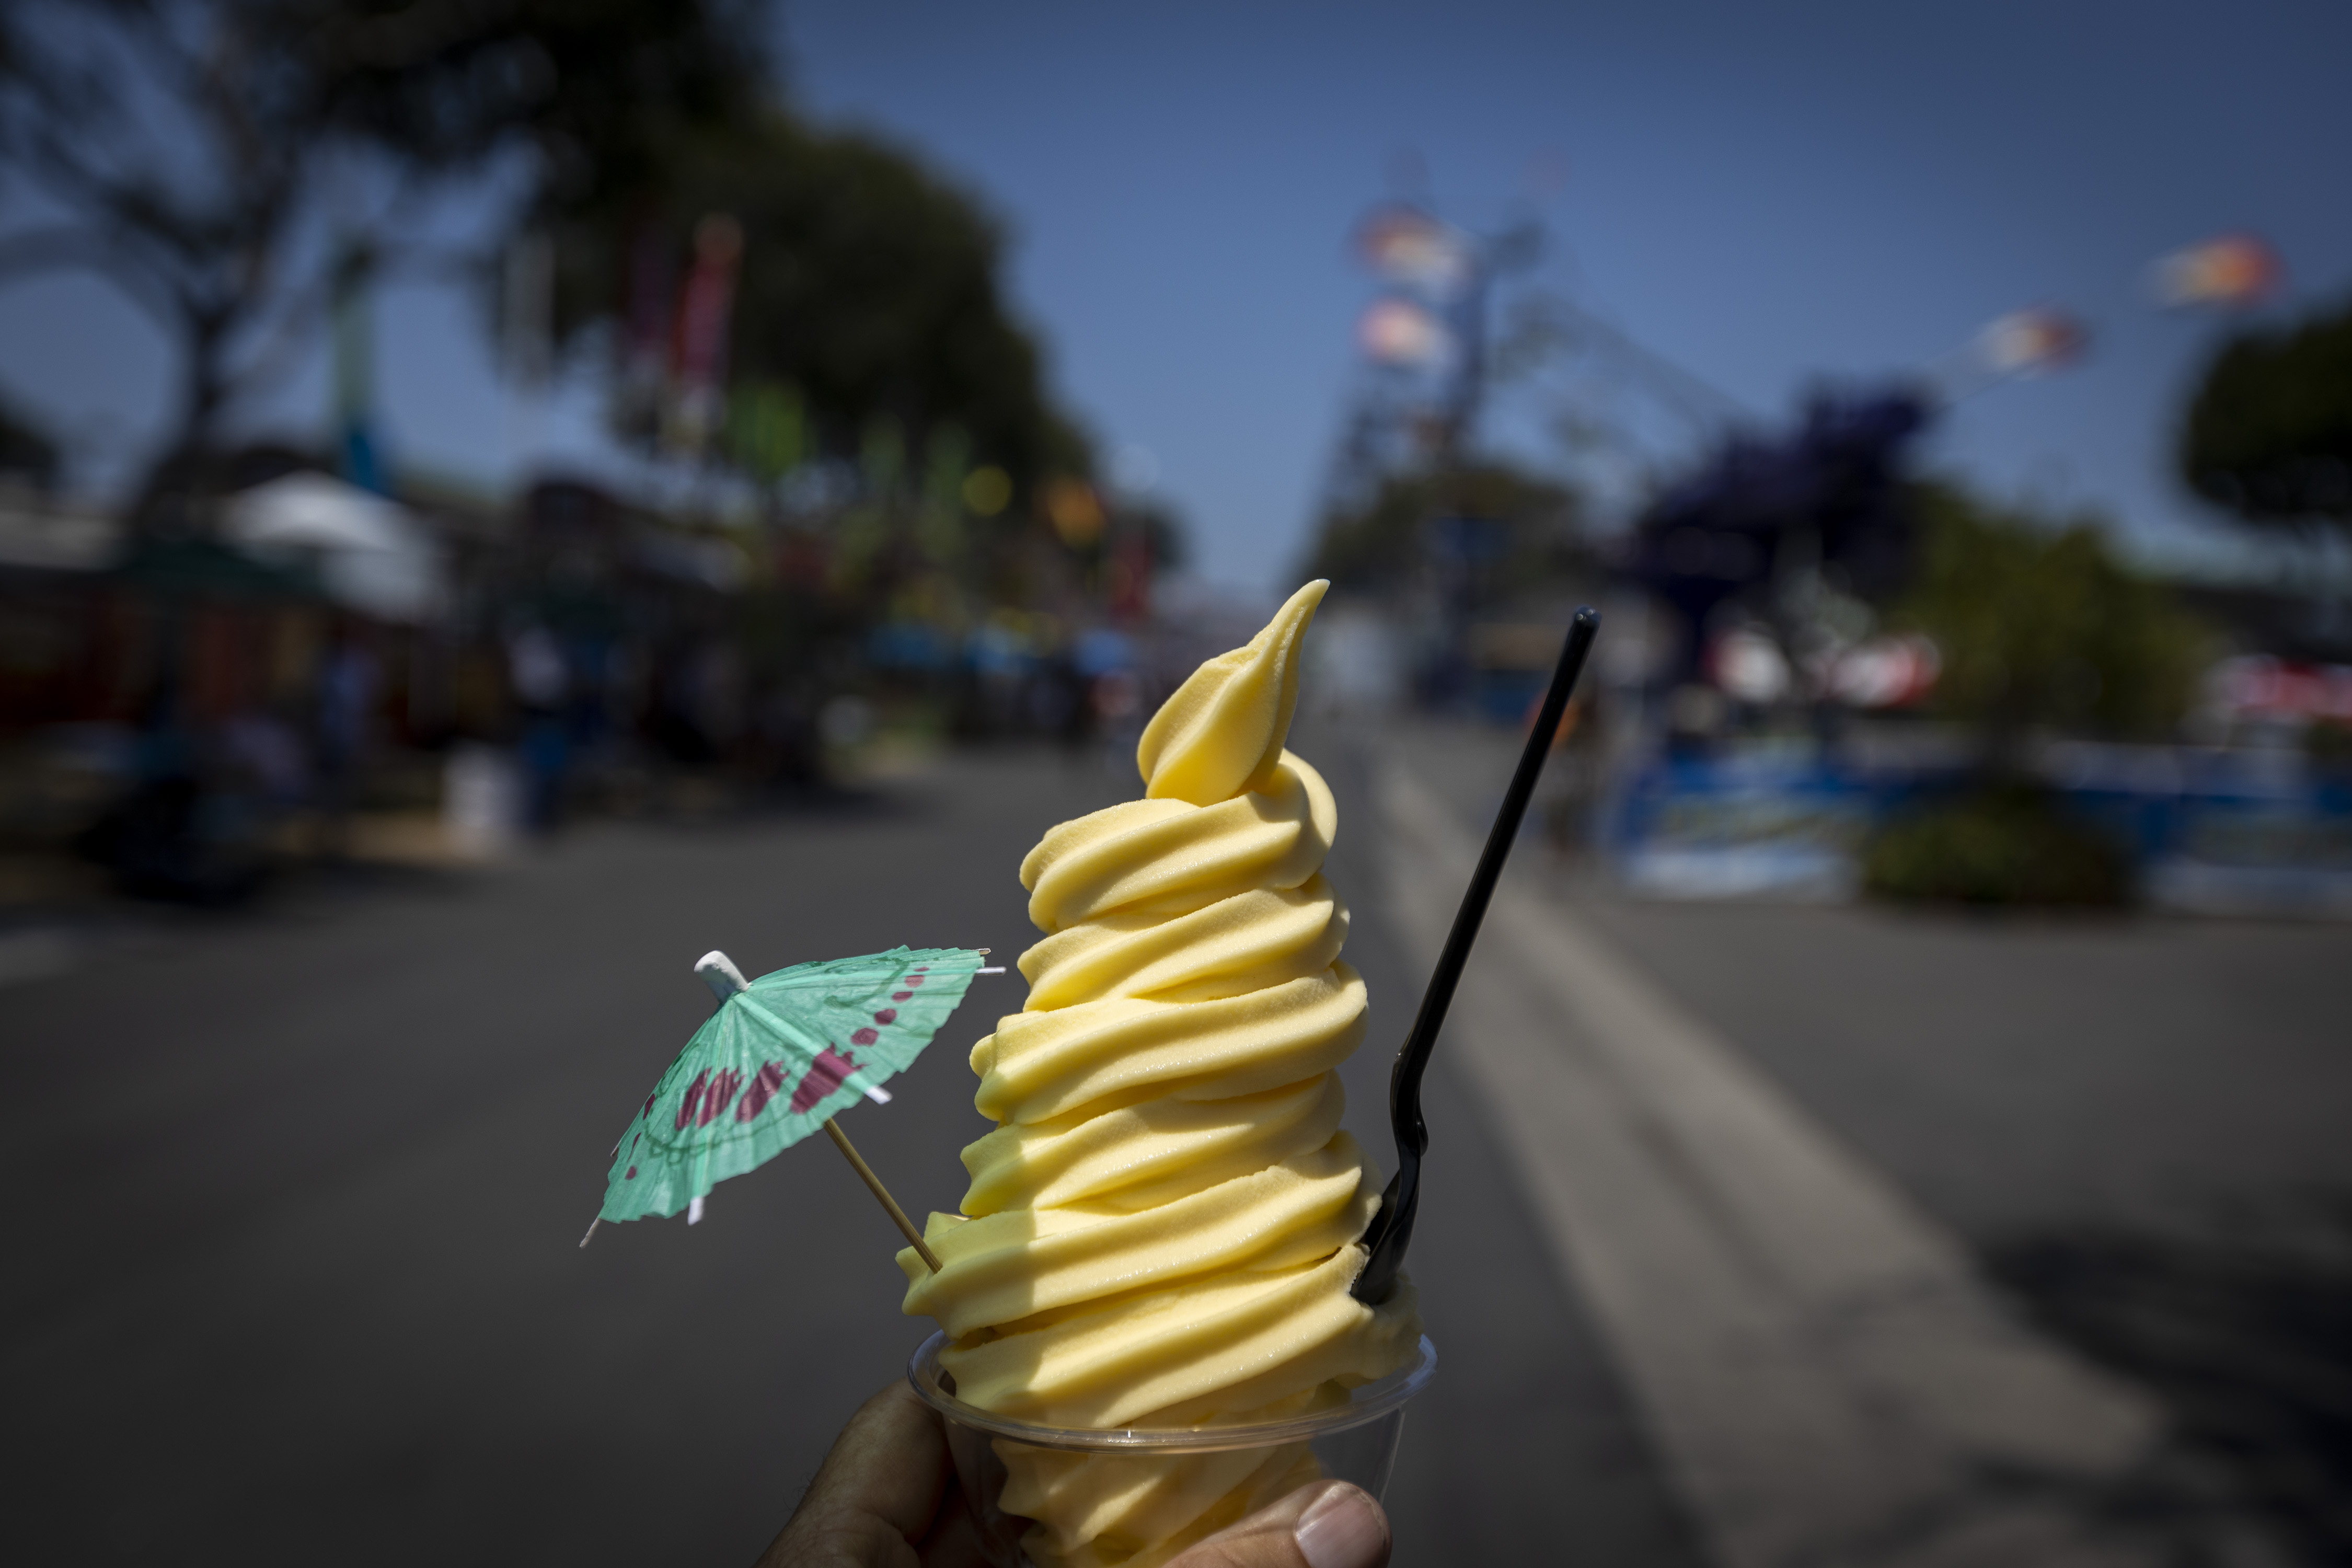 Disneyland Diehards Rejoice: The Famed Dole Whip is Coming to a Freezer Section Near You